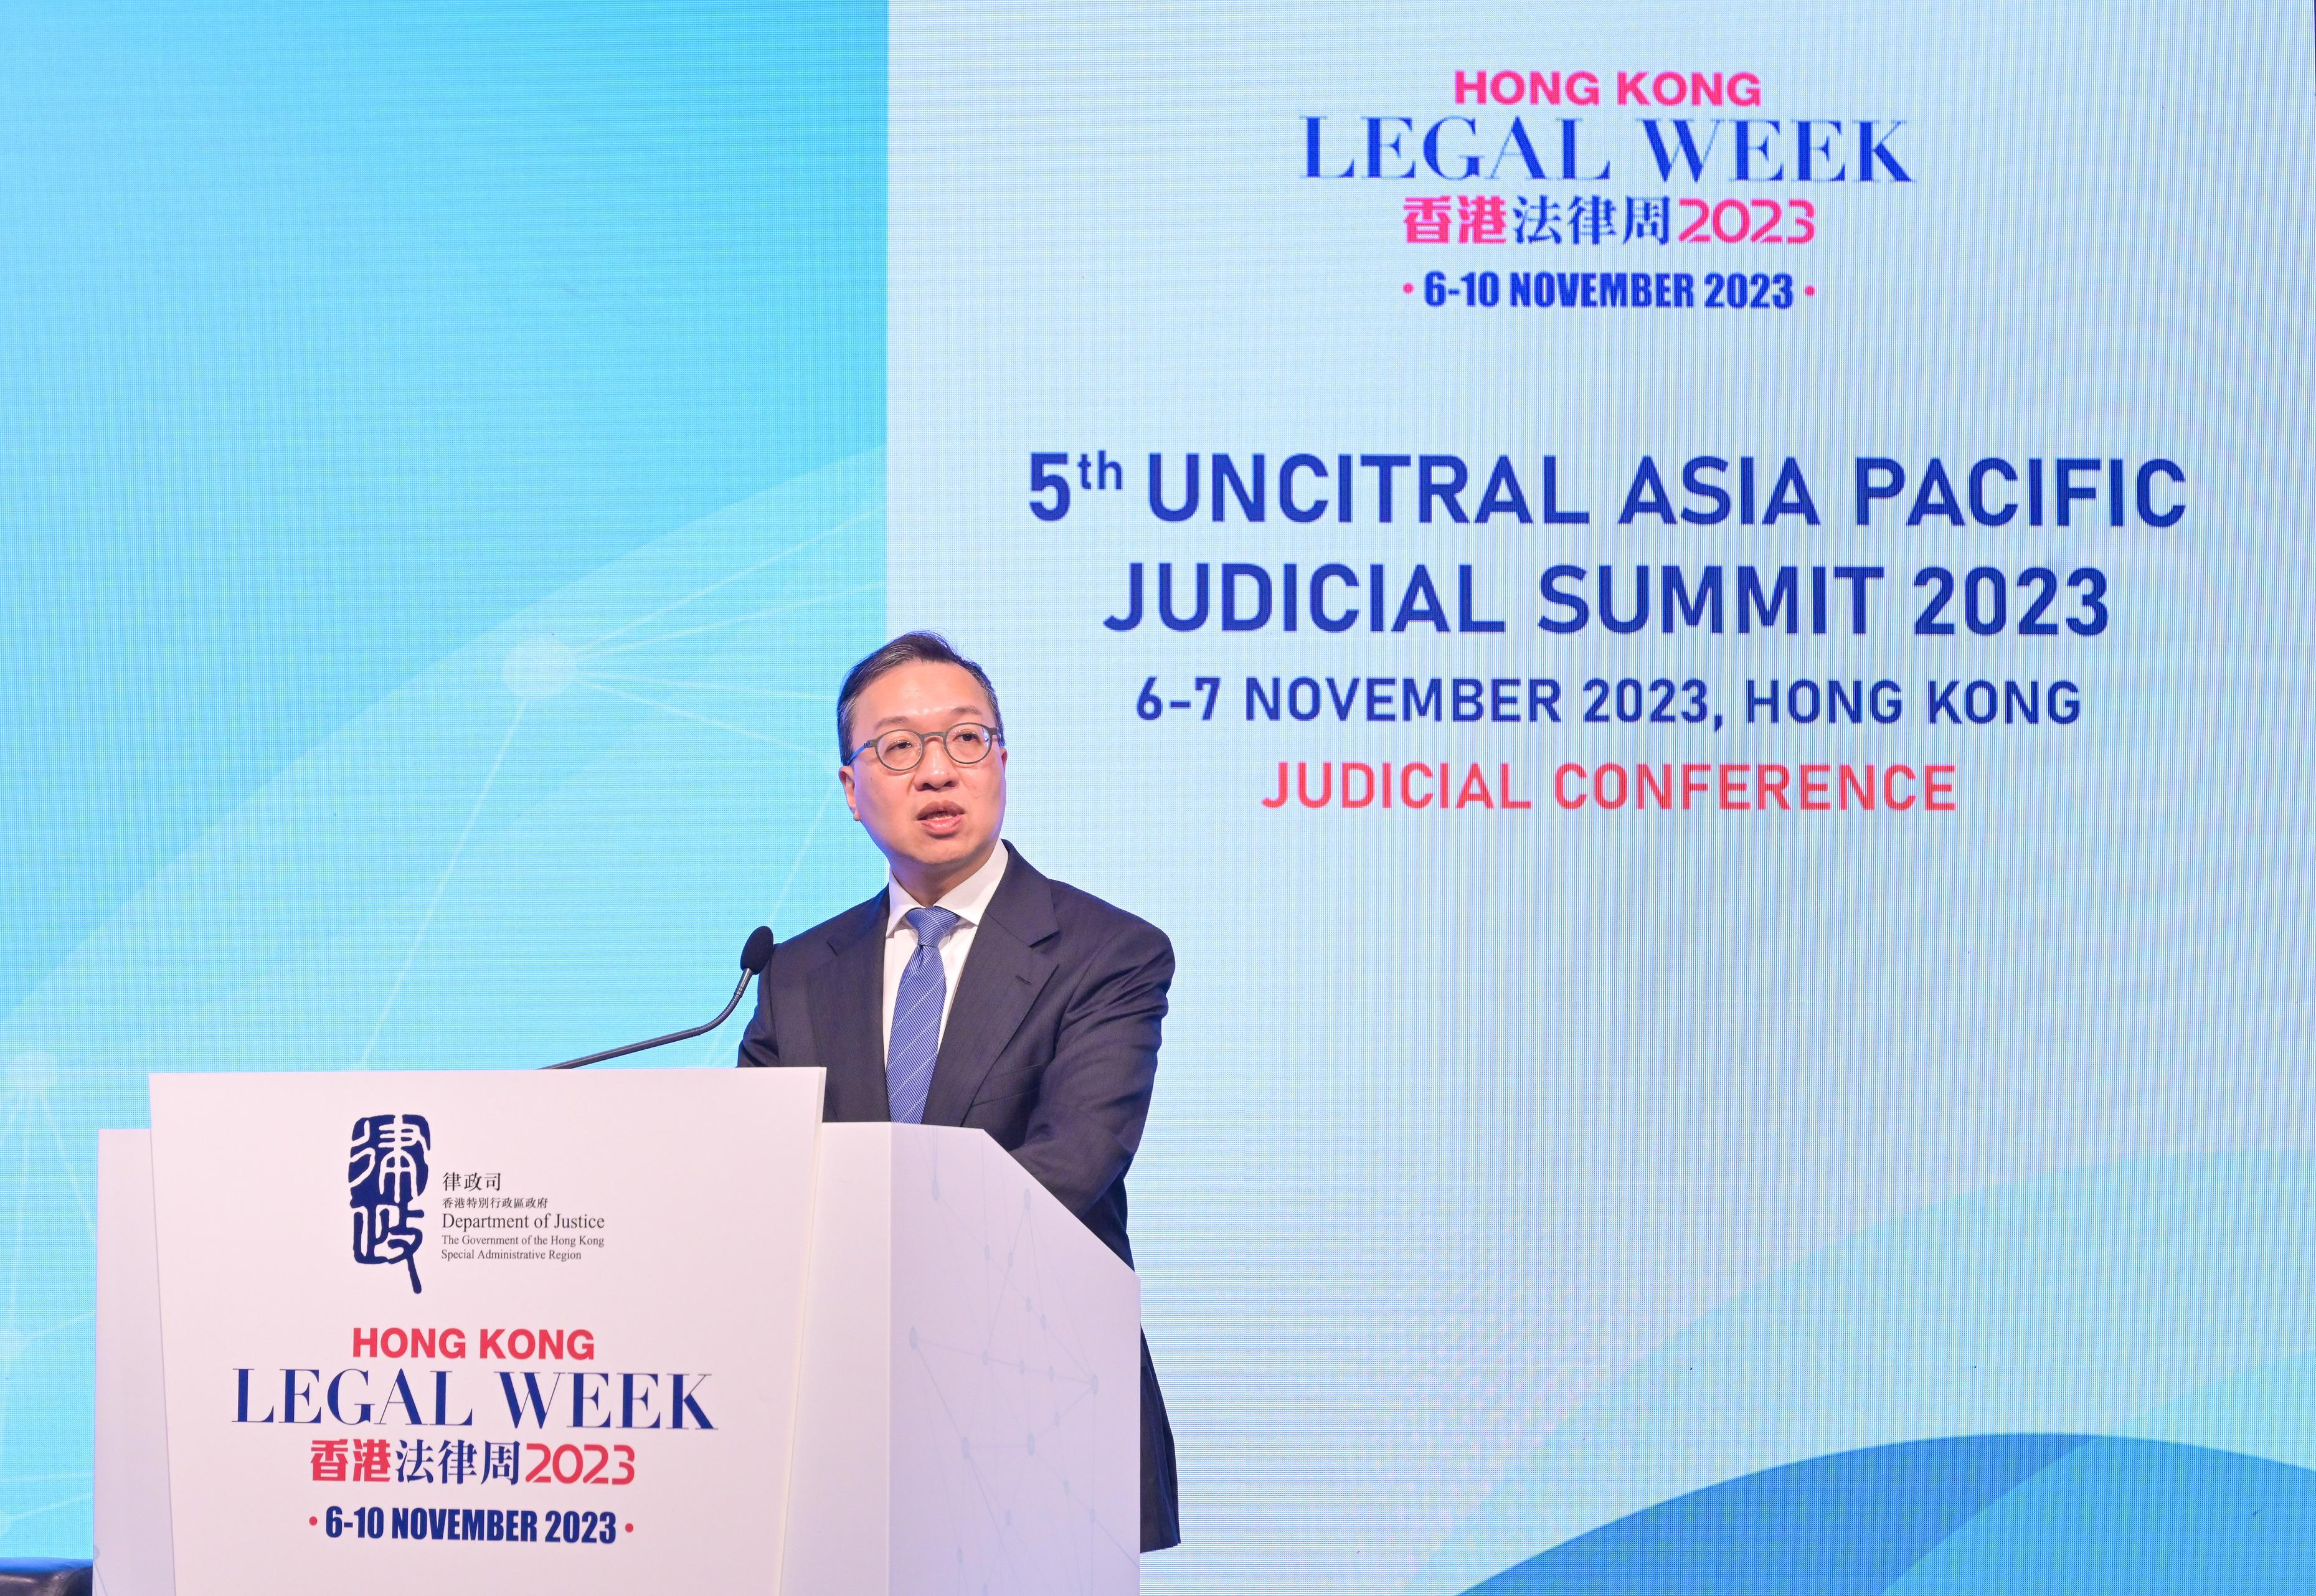 The Secretary for Justice, Mr Paul Lam, SC, delivers welcome remarks at the 5th UNCITRAL Asia Pacific Judicial Summit - Judicial Conference under the Hong Kong Legal Week 2023 today (November 6).
